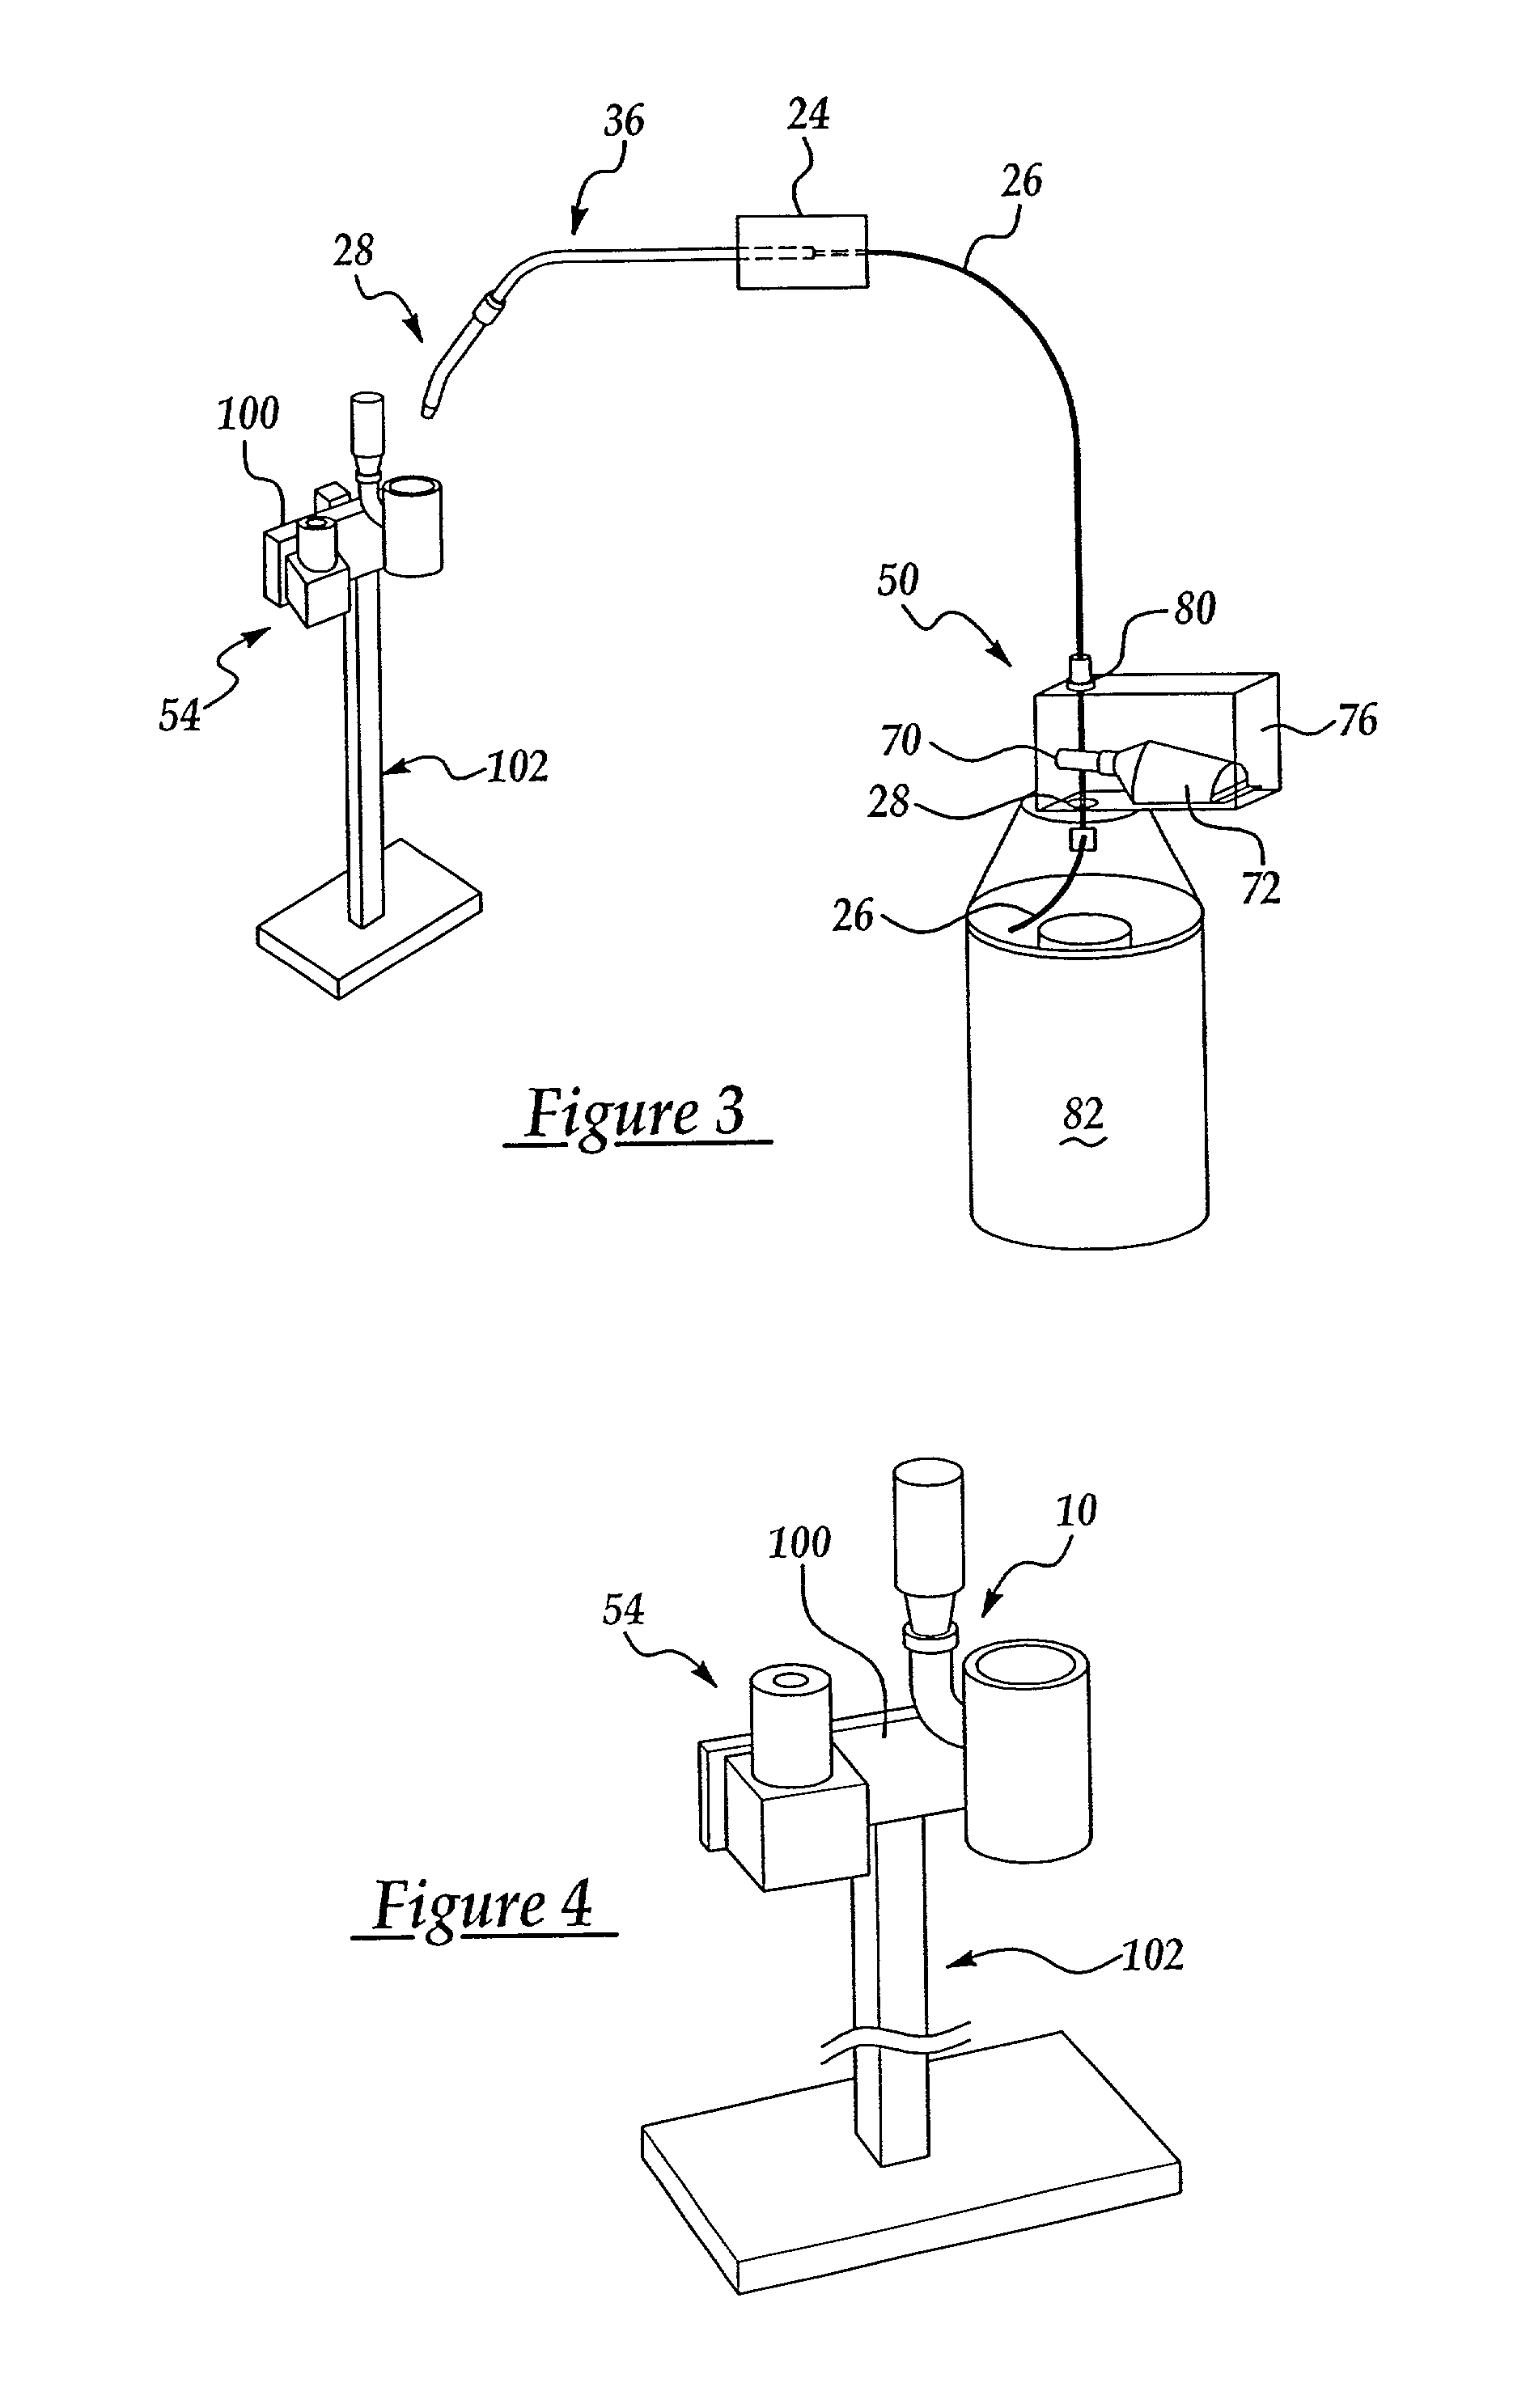 Implementation system for continuous welding, method, and products for the implementation of the system and/or method